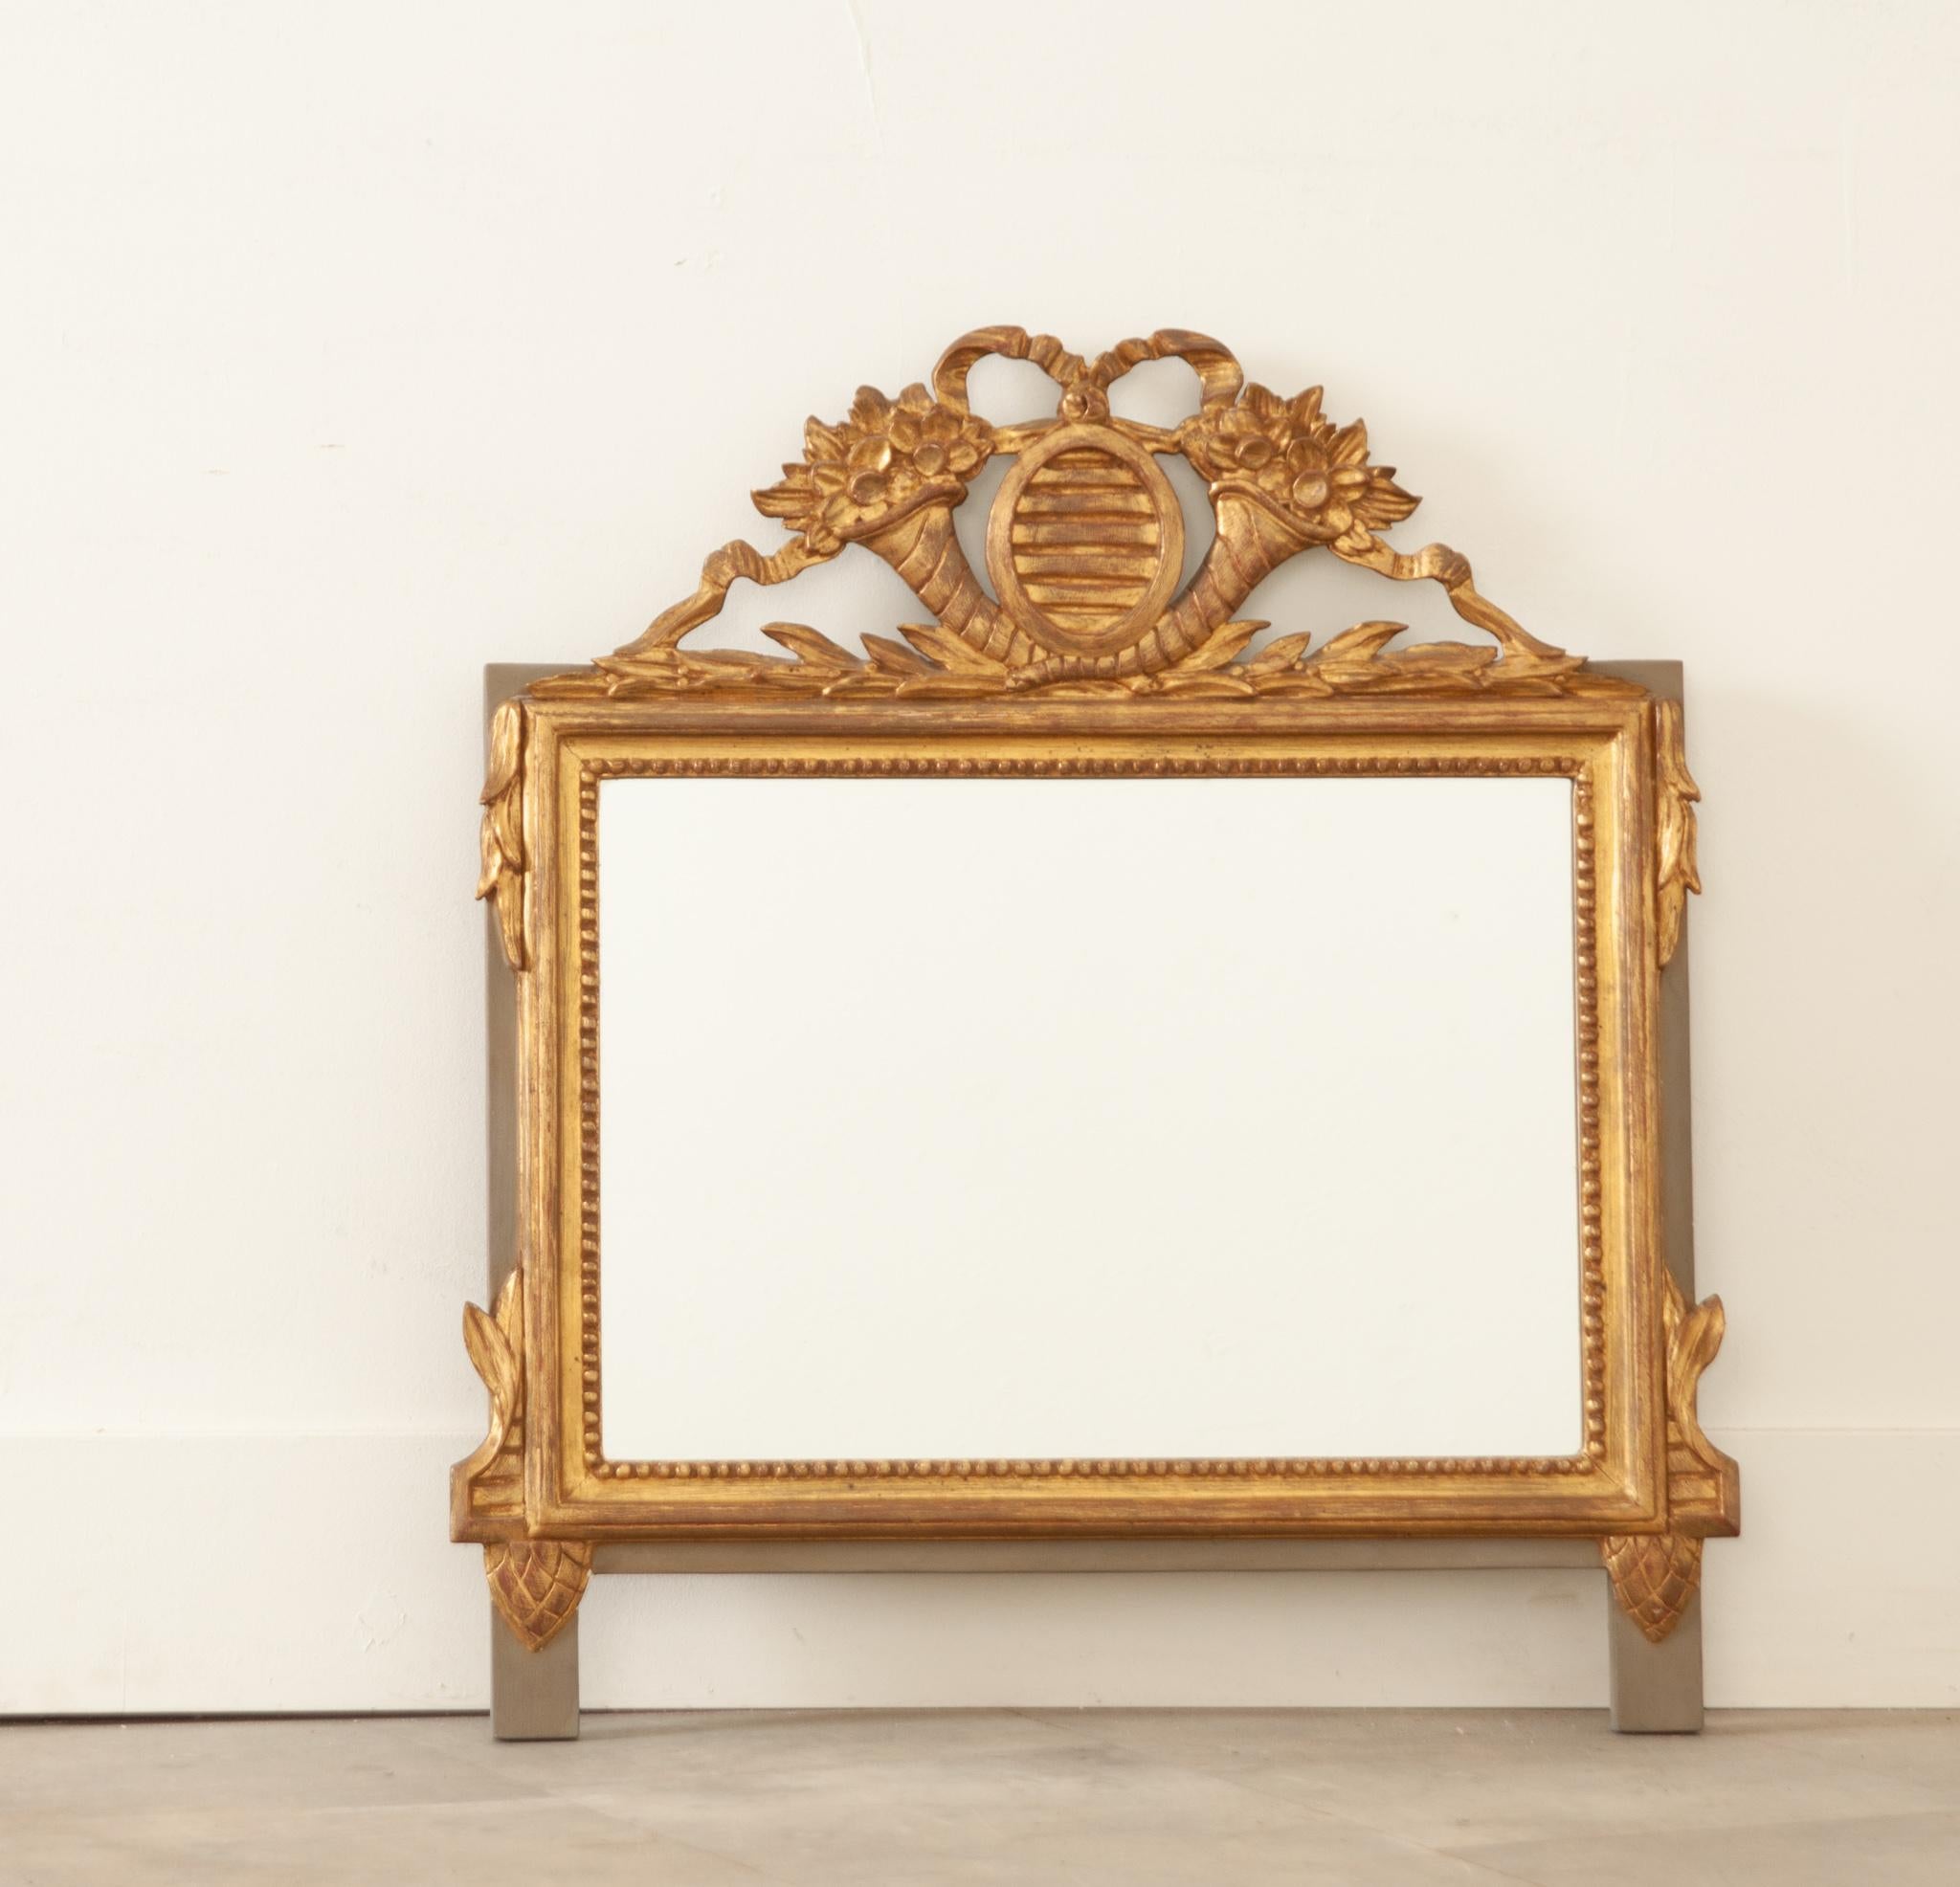 A darling gold gilt Louis XVI style pier mirror from France, crafted during the 1870s. A carved crest of flower bouquets and bowed ribbon sits atop the frame and has its original brilliant wanter guild finish. The mirror frame is surrounded by a